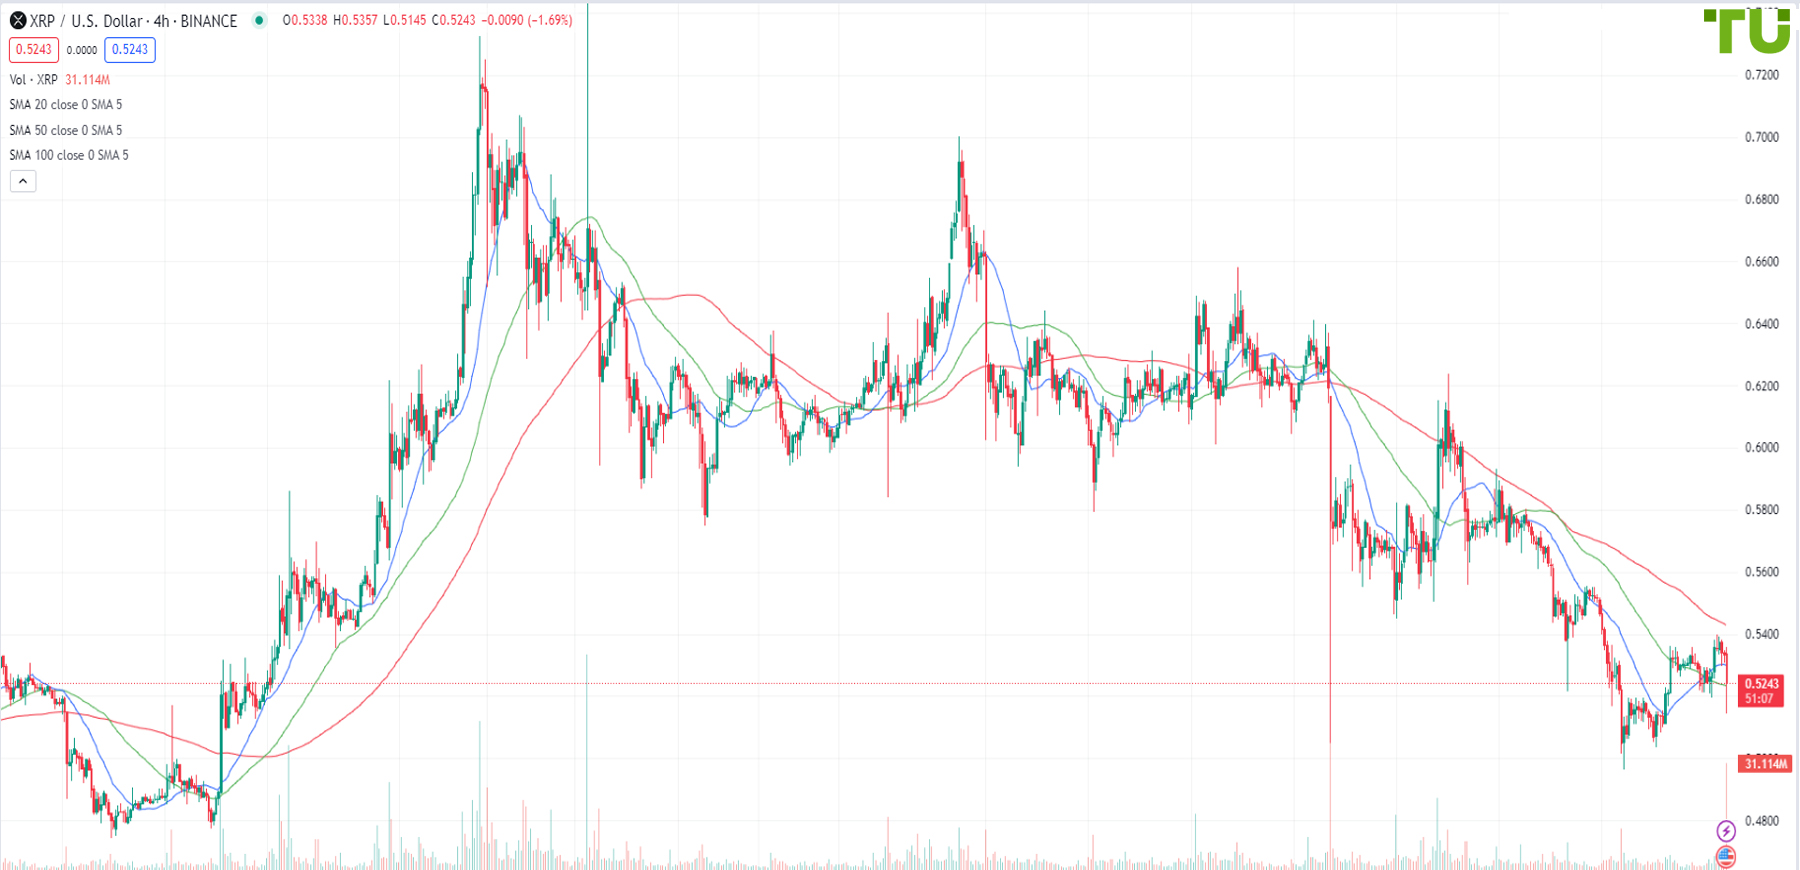 XRP/USD under pressure after growth